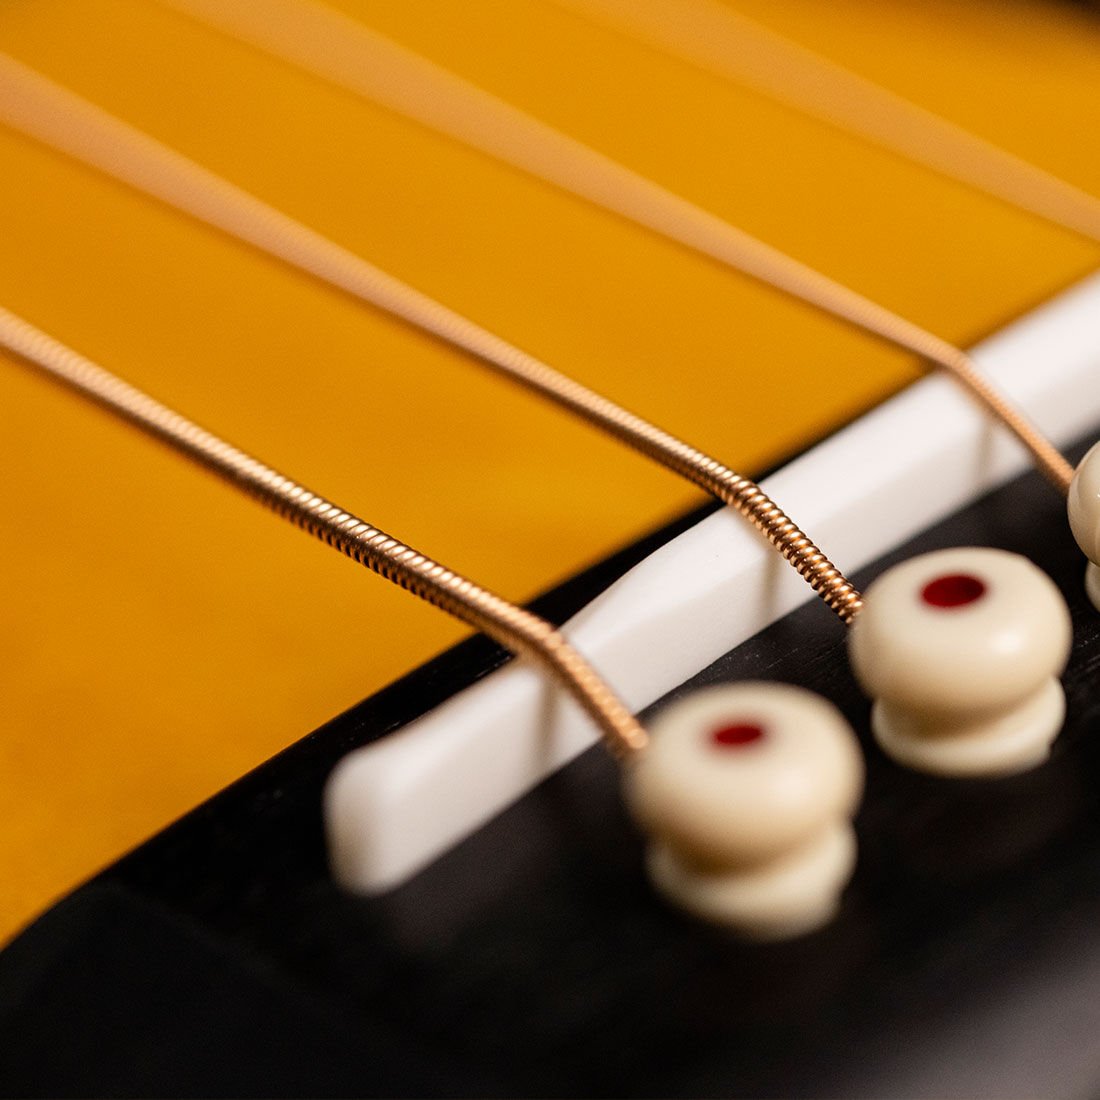 Closeup picture of strings on an acoustic guitar